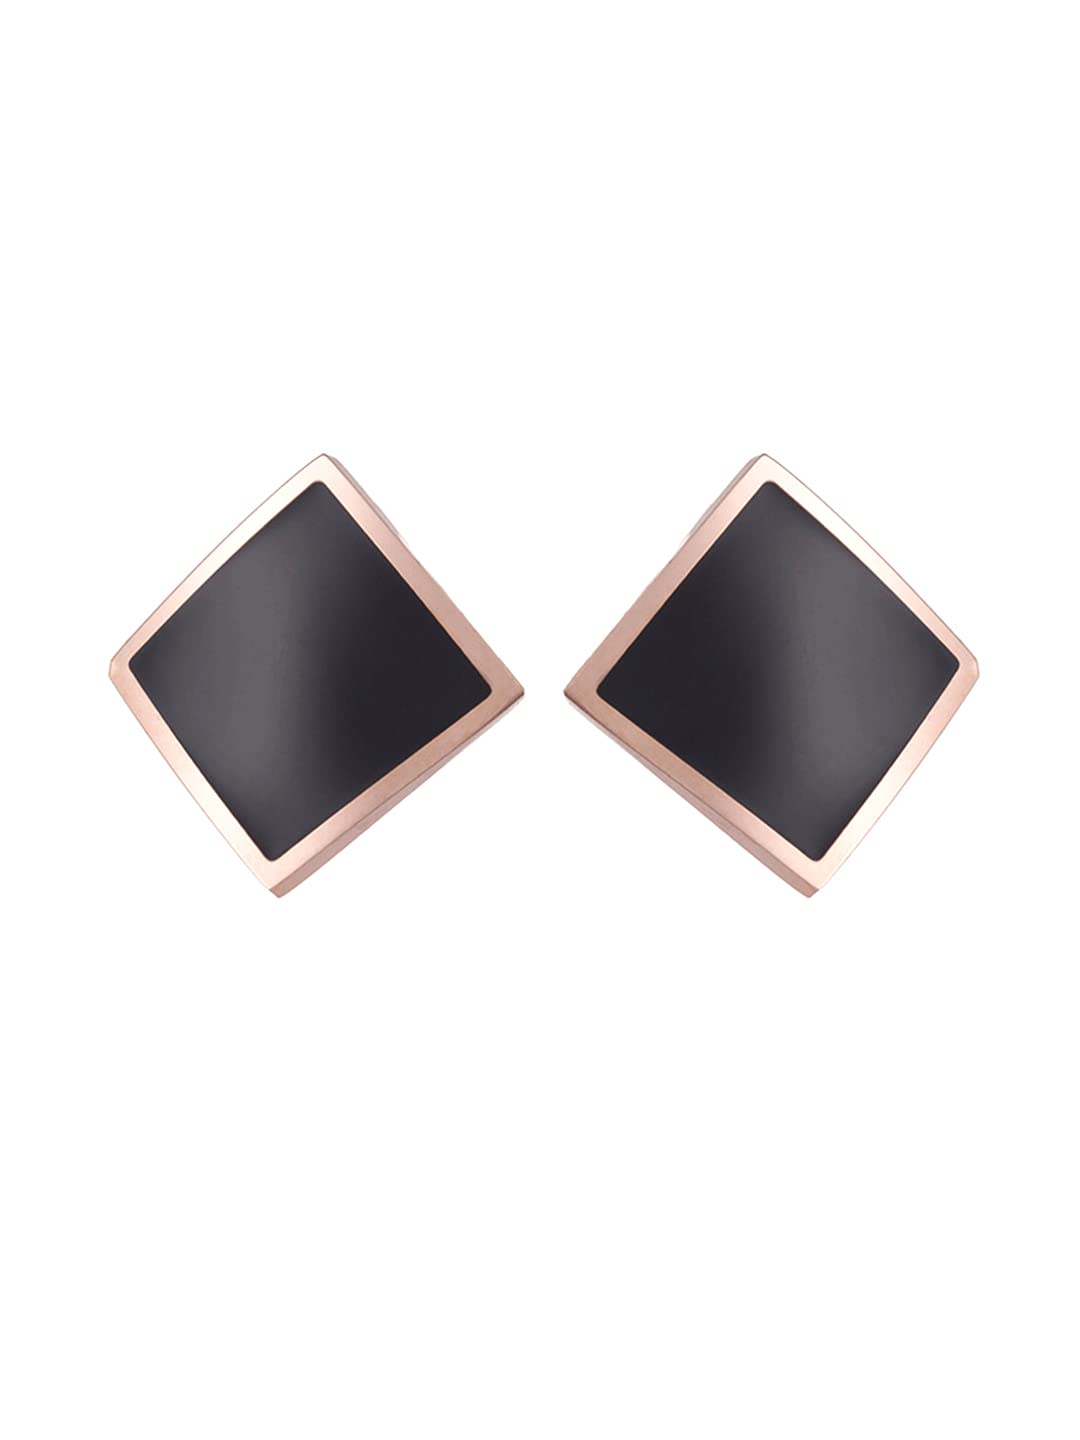 Yellow Chimes Stud Earrings for Women Western Rose Gold Plated Stainless Steel Black Square Stud Earrings For Women and Girls